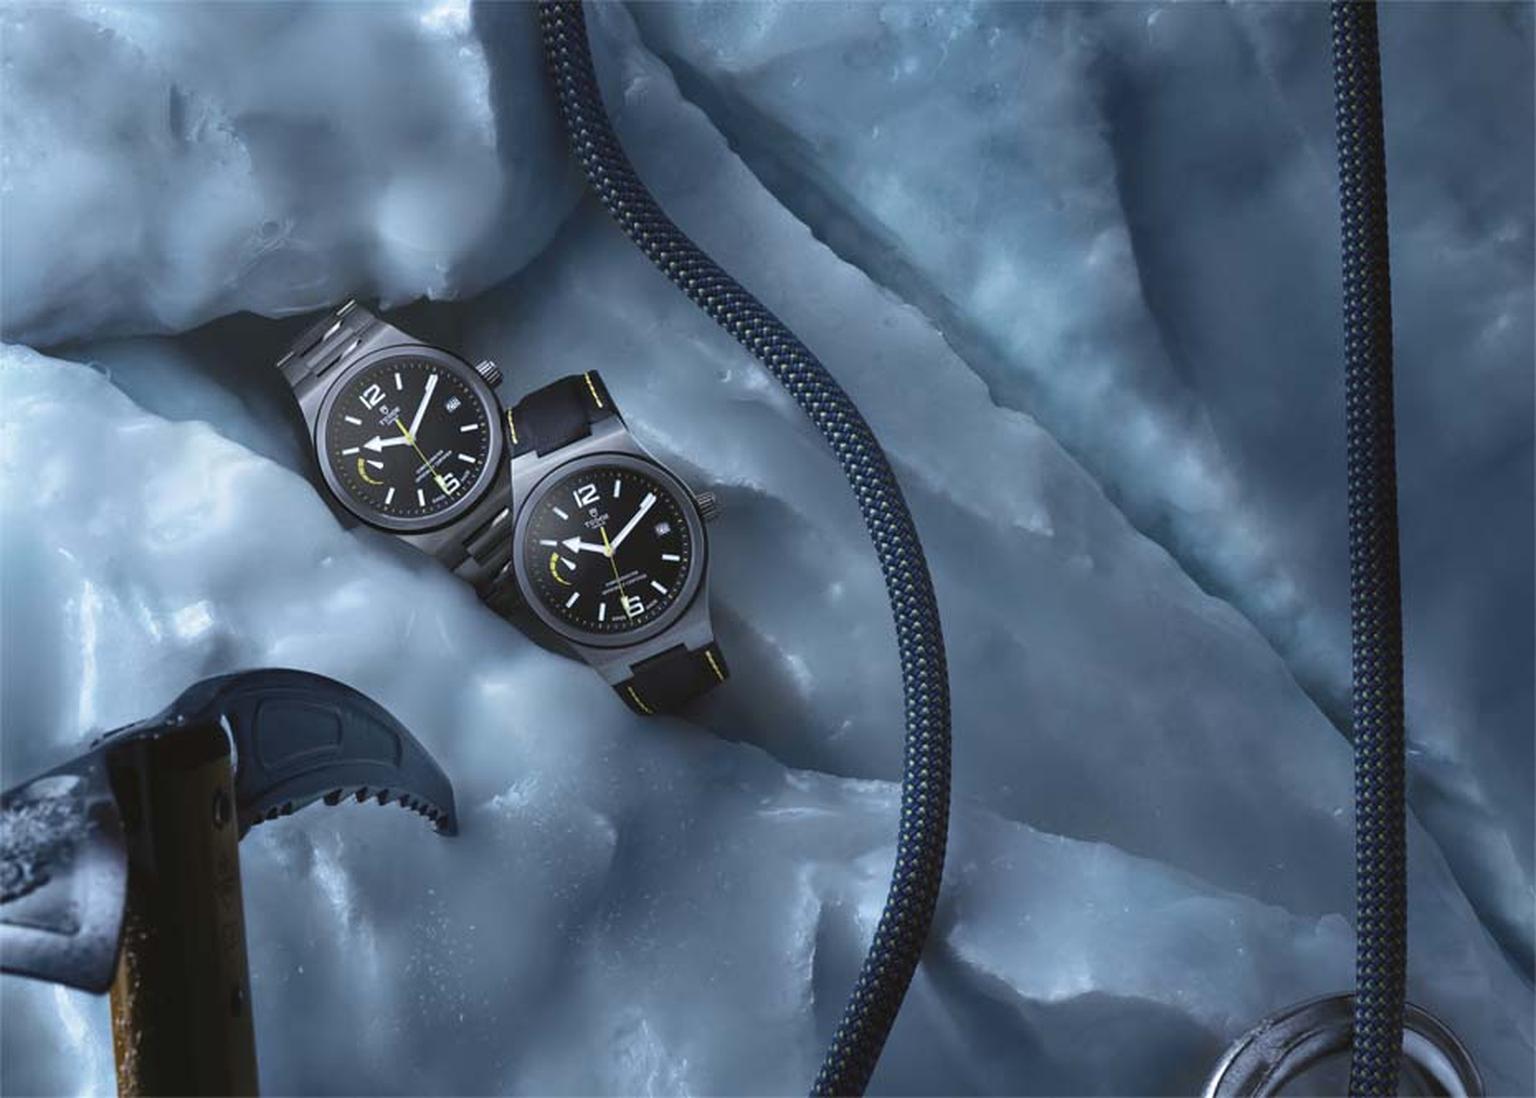 Tudor North Flag watches are presented in 40mm angular stainless steel cases with a black ceramic ring, matte black dial and yellow markings on the seconds hand, five-minute intervals and power reserve indicator, giving the watch a masculine presence prep